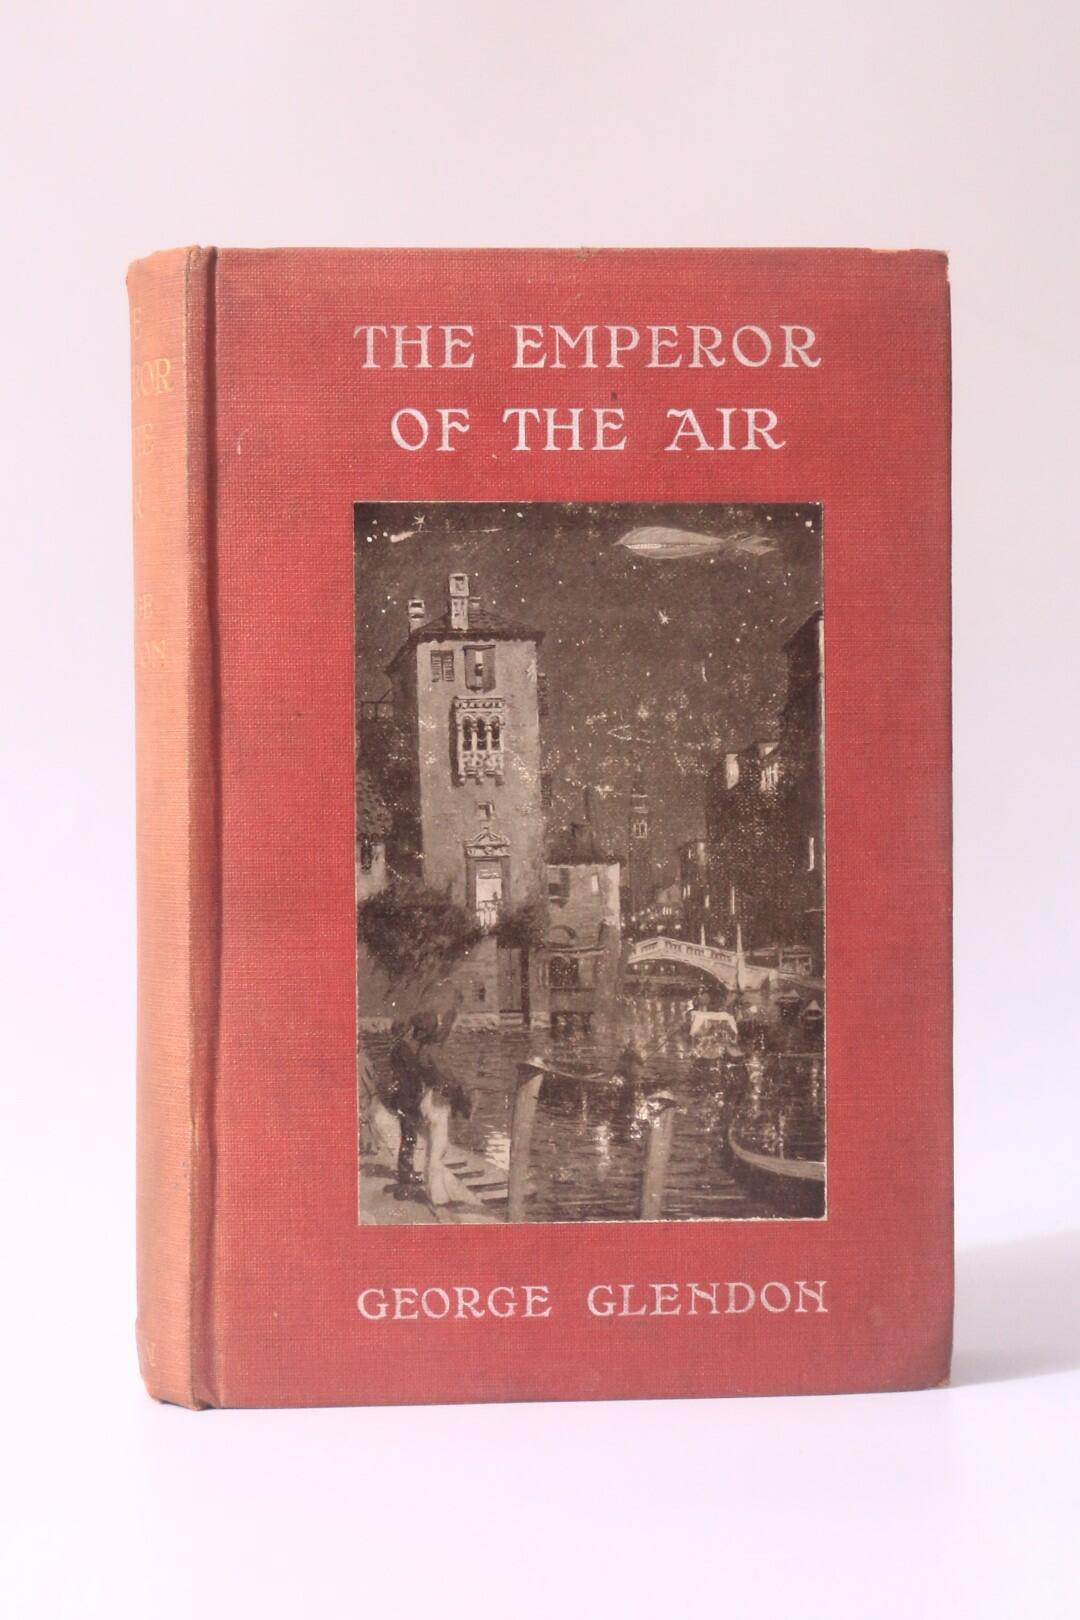 George Glendon - The Emperor of the Air - Methuen, 1910, First Edition.